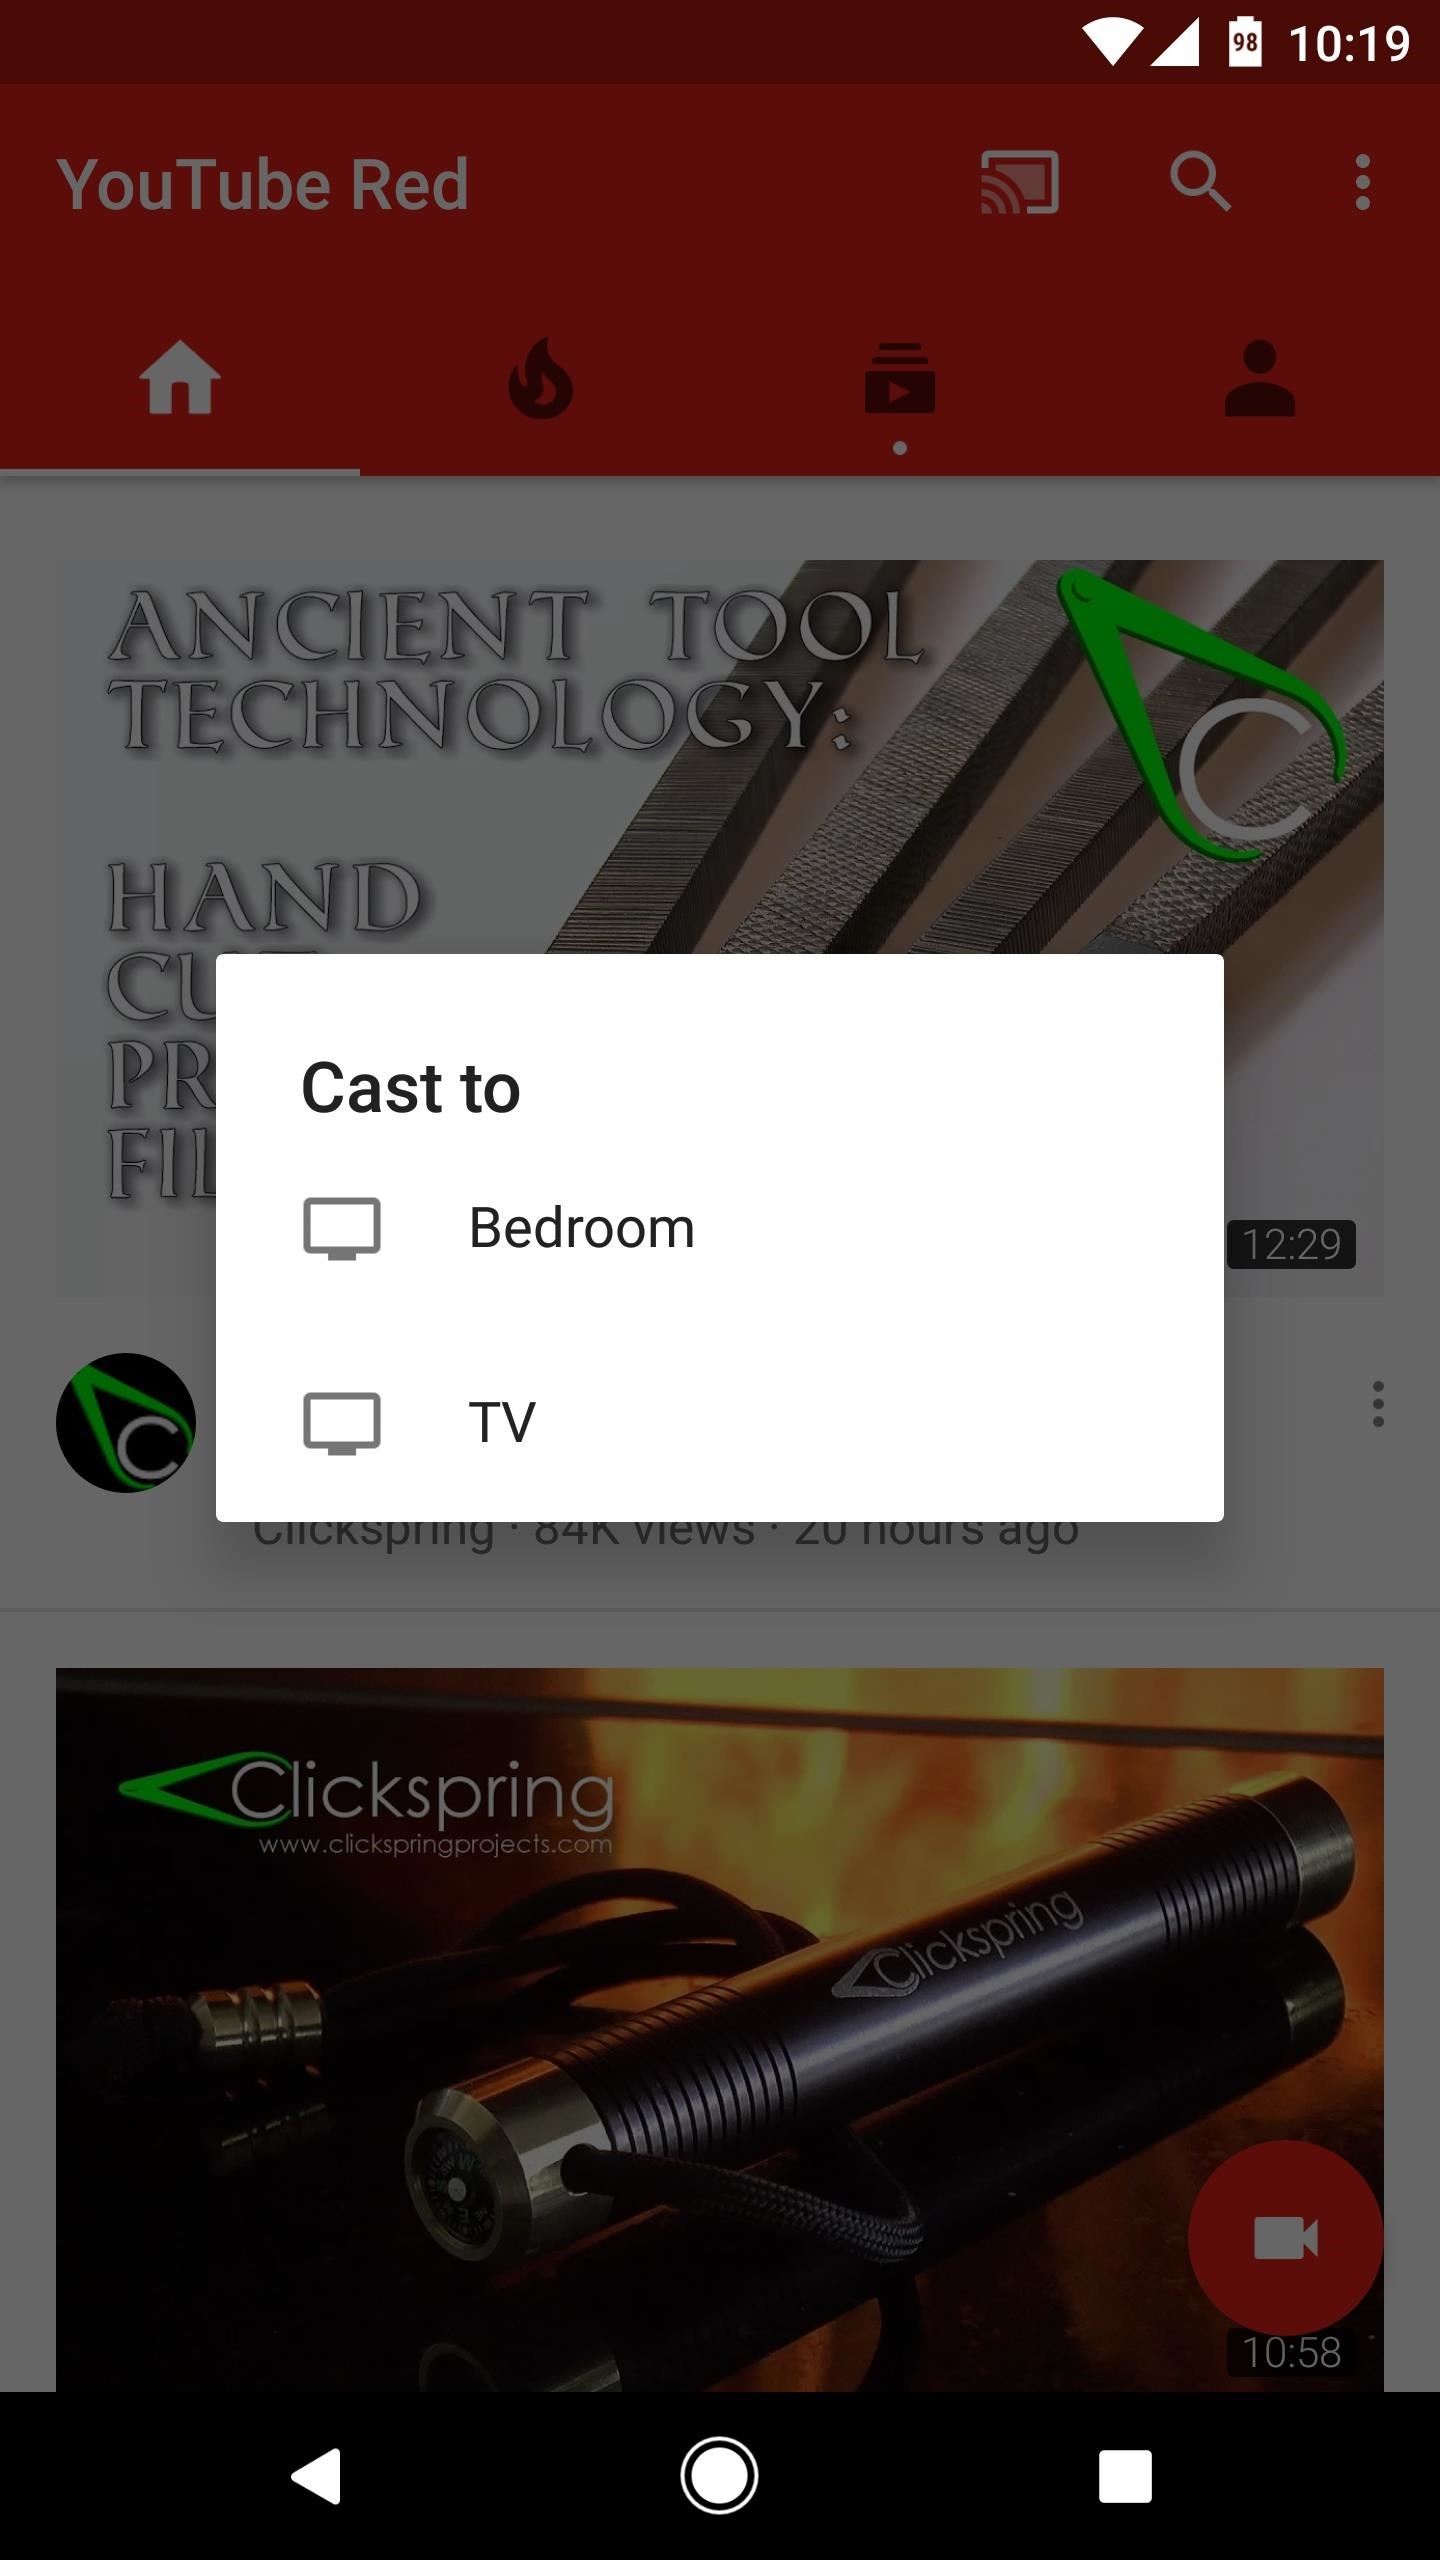 YouTube 101: How to Cast Videos to Your TV